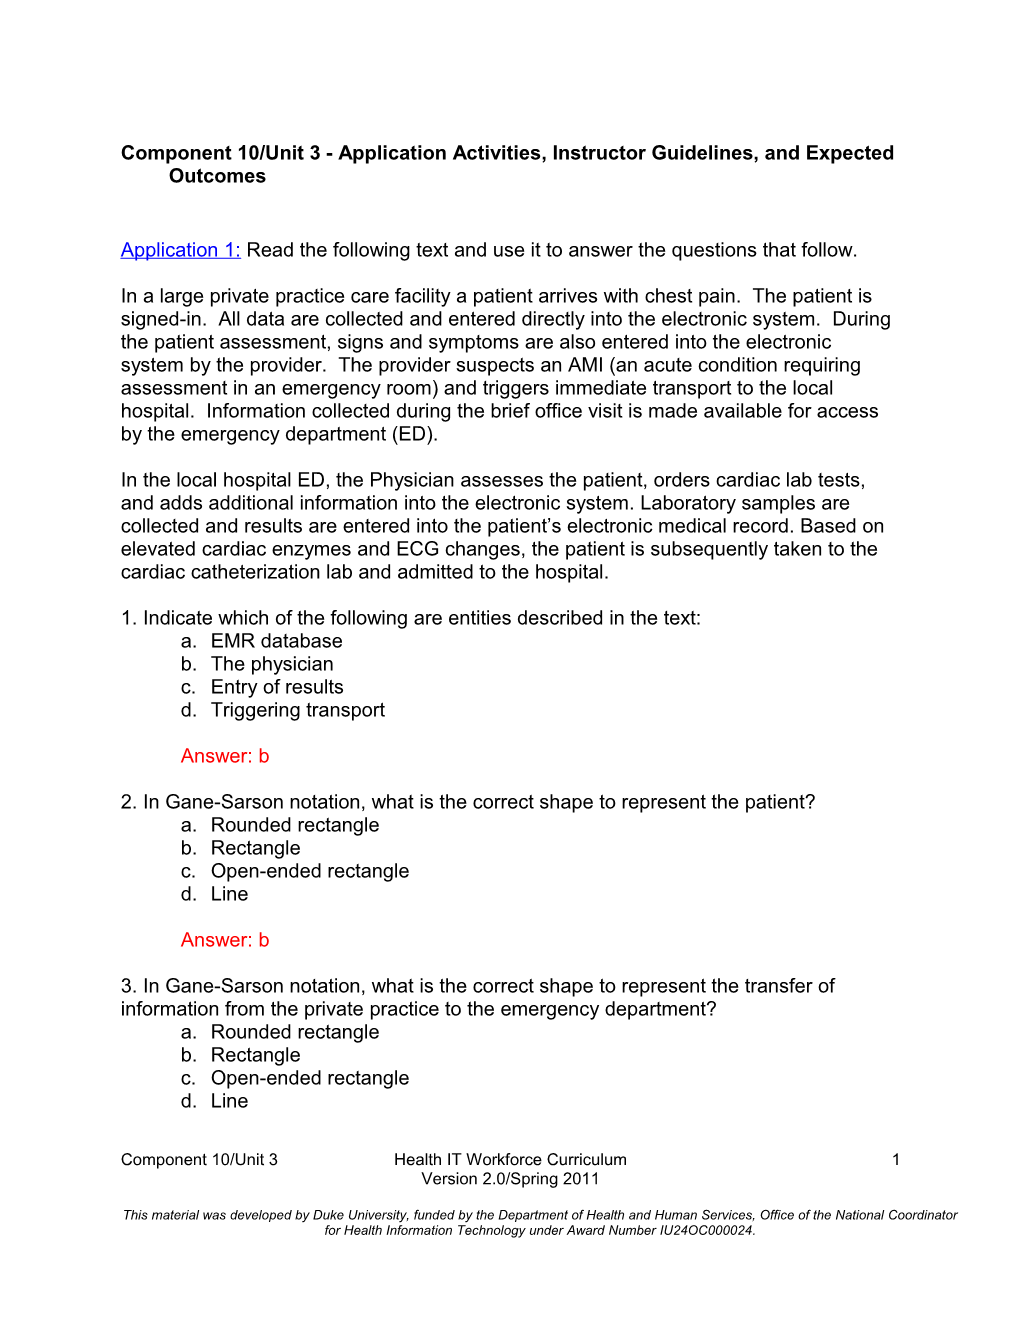 Component 10/Unit 3 - Application Activities, Instructor Guidelines, and Expected Outcomes